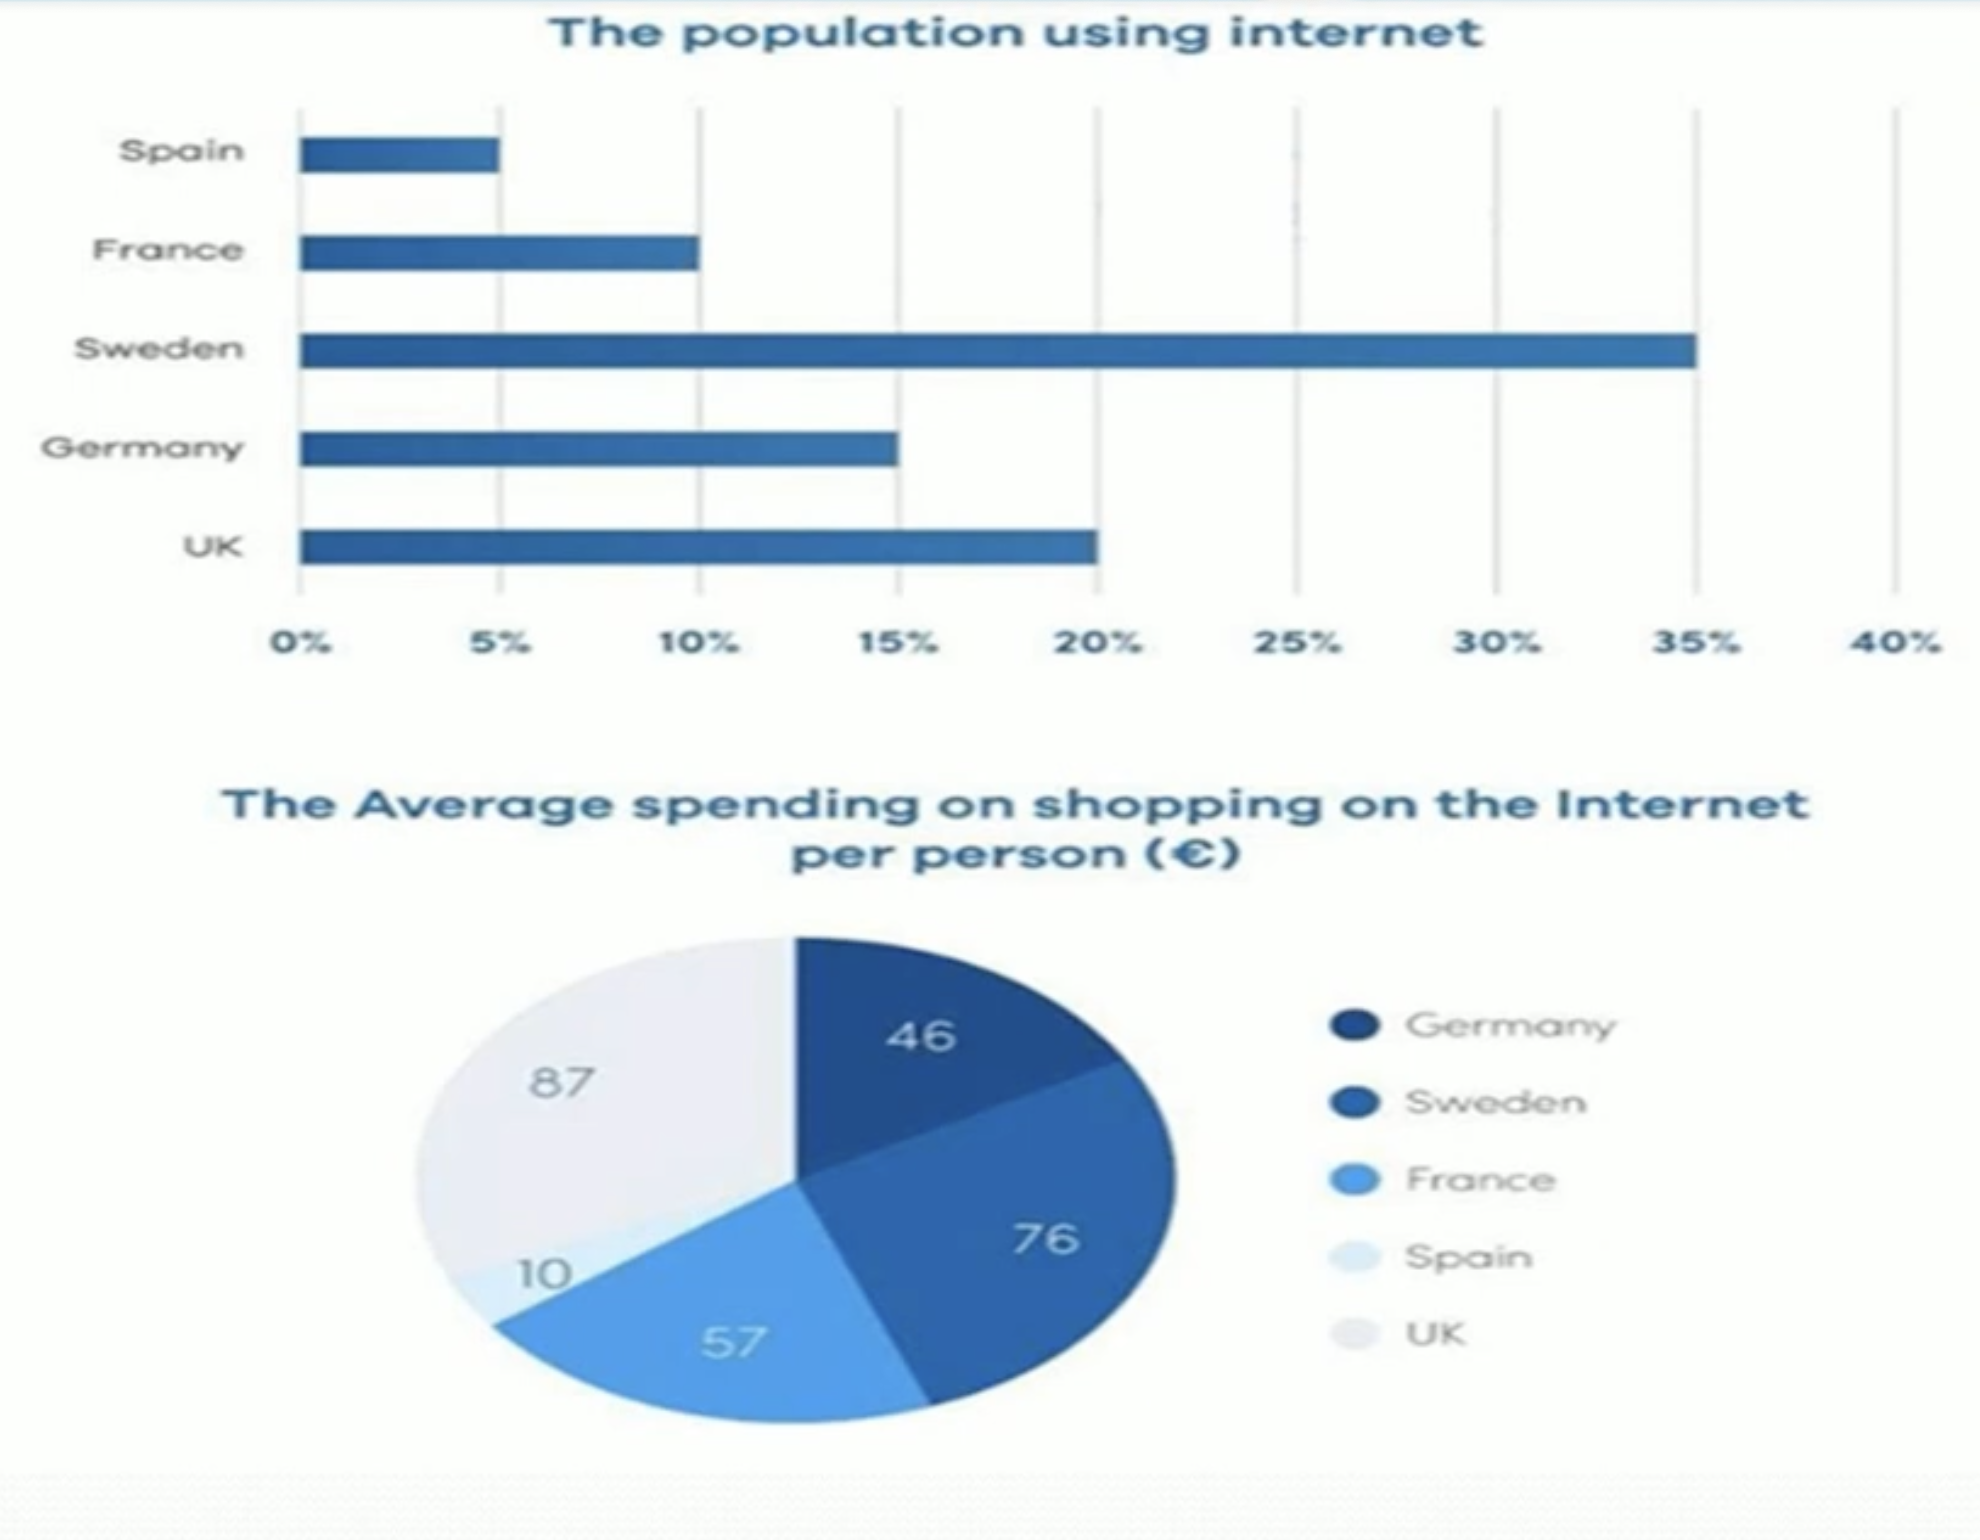 The average spending on shopping on the internet per person